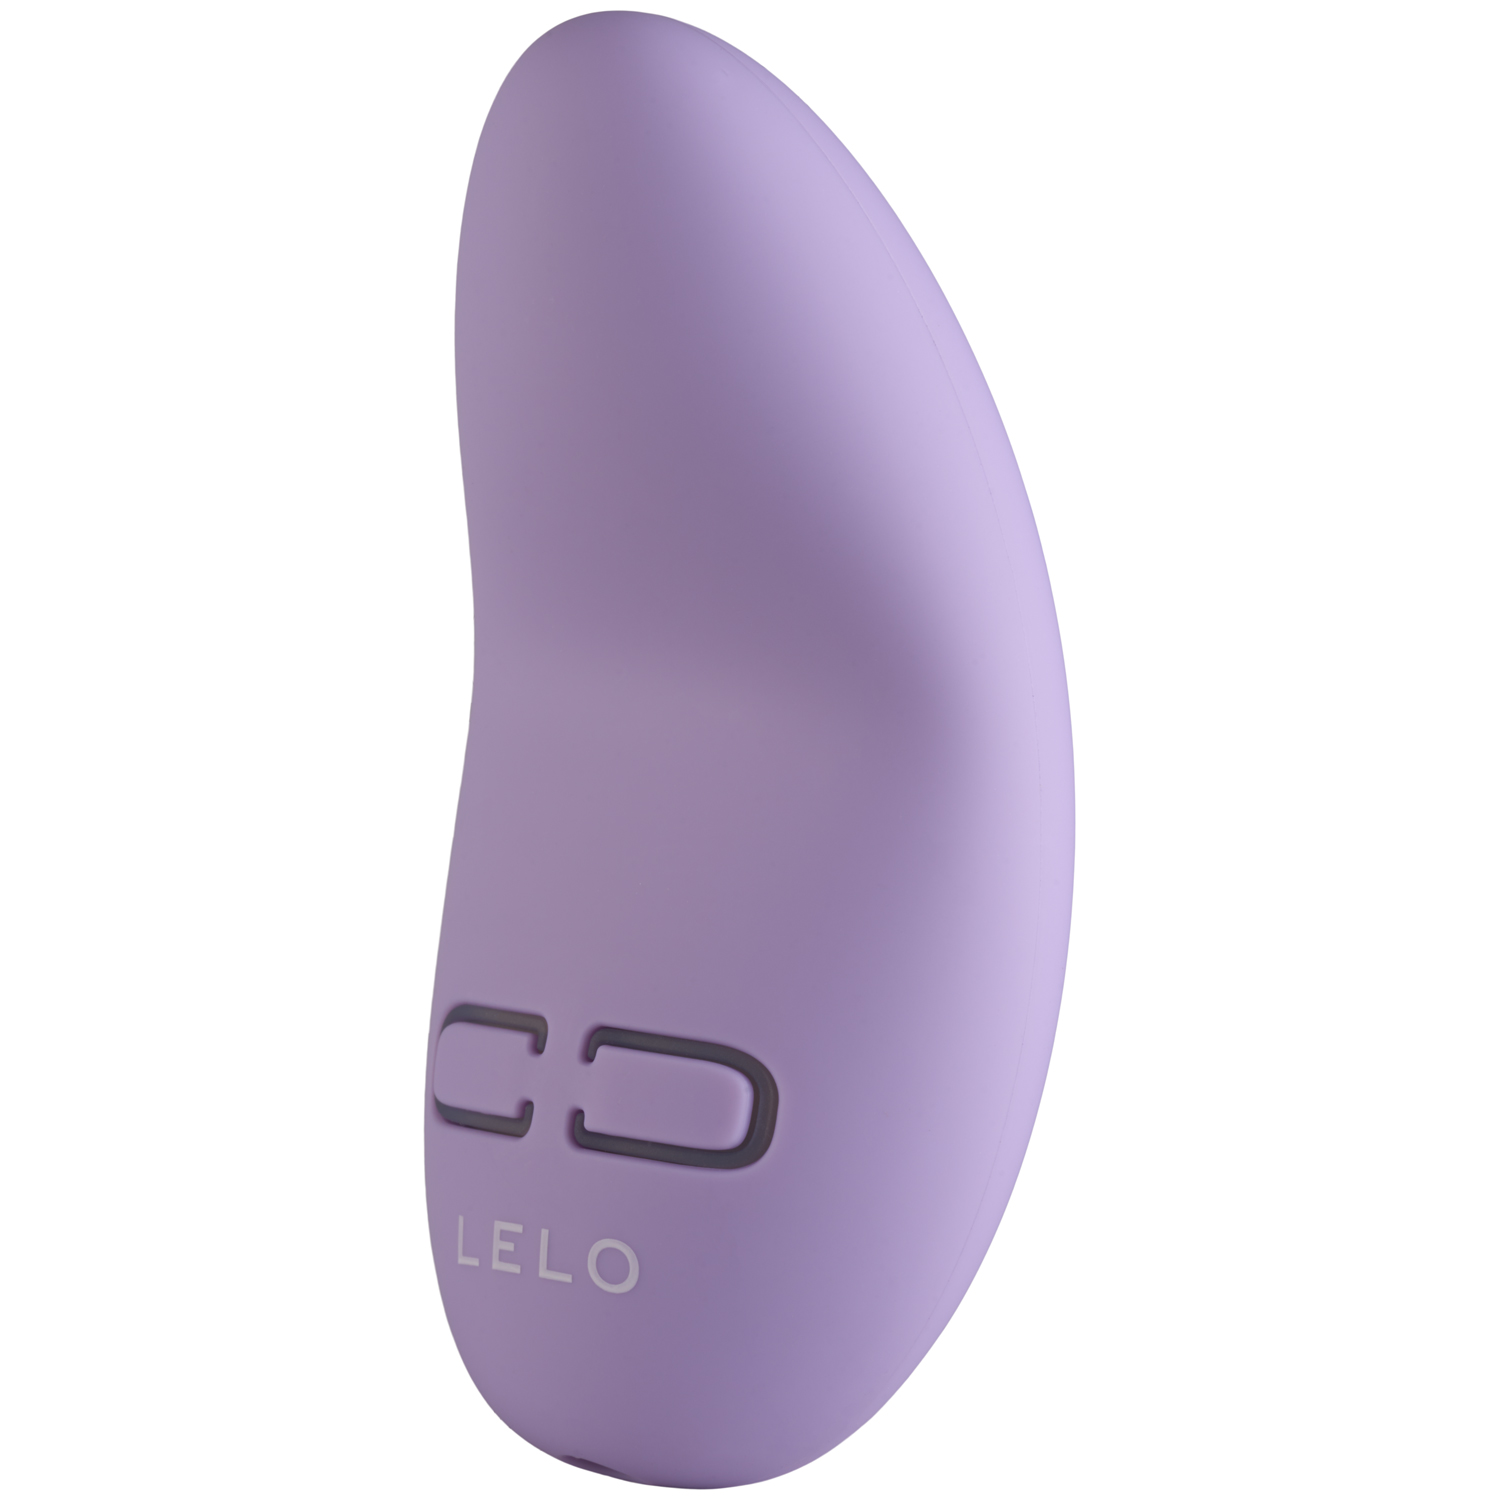 LELO Lily 3 Personal Massager - Pink